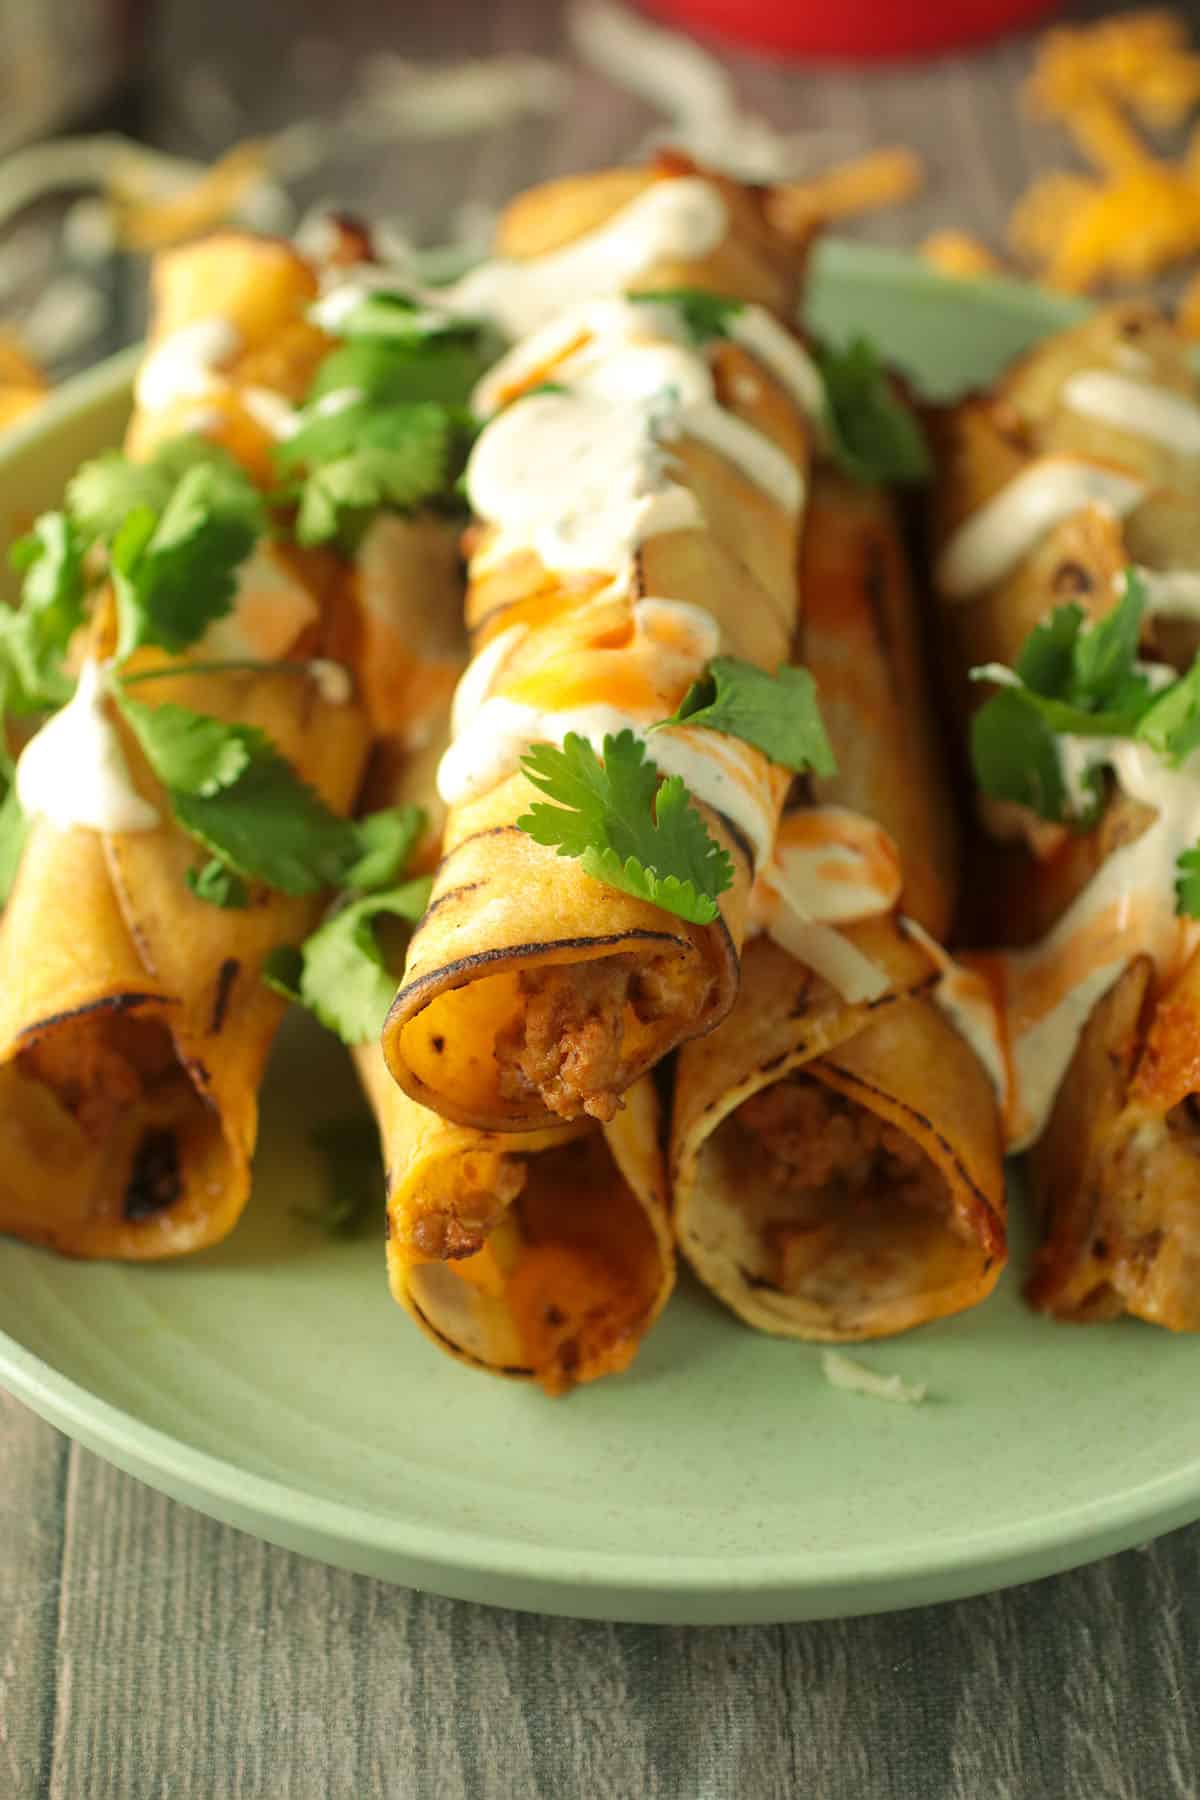 Baked turkey taquitos drizzled with hot sauce, sour cream sauce and garnished with cilantro.